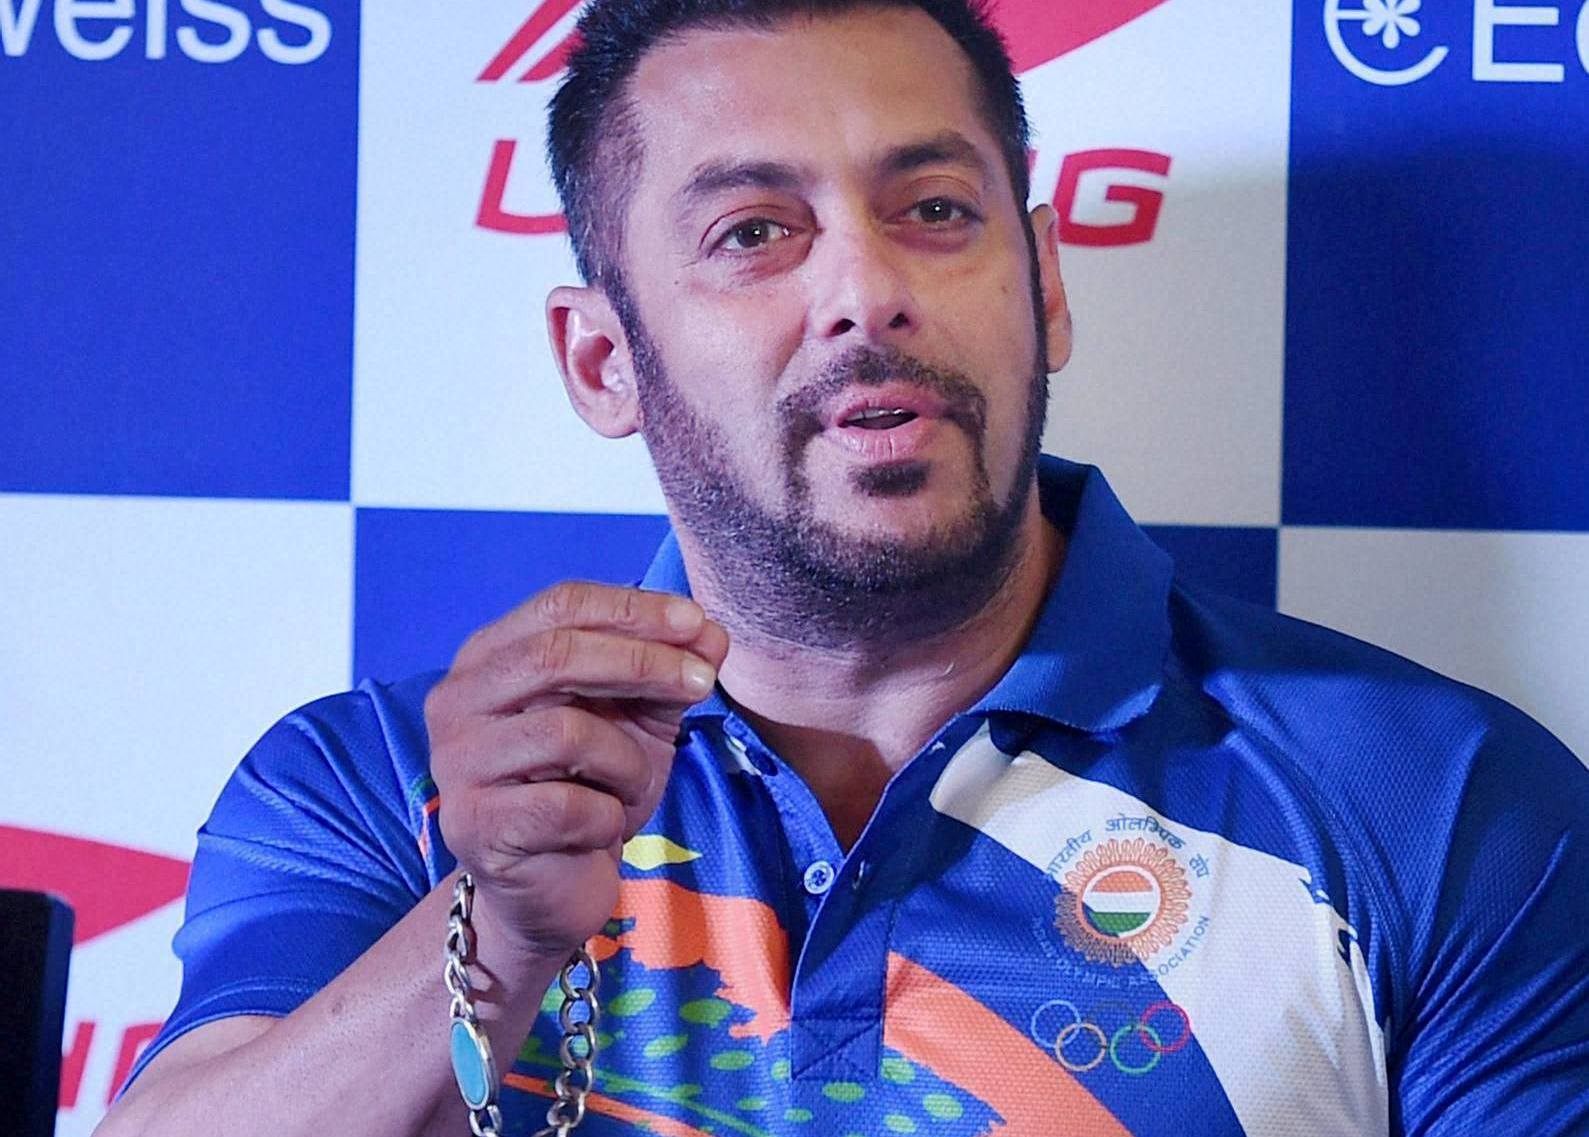 Losing weight post 'Sultan' was painful: Salman